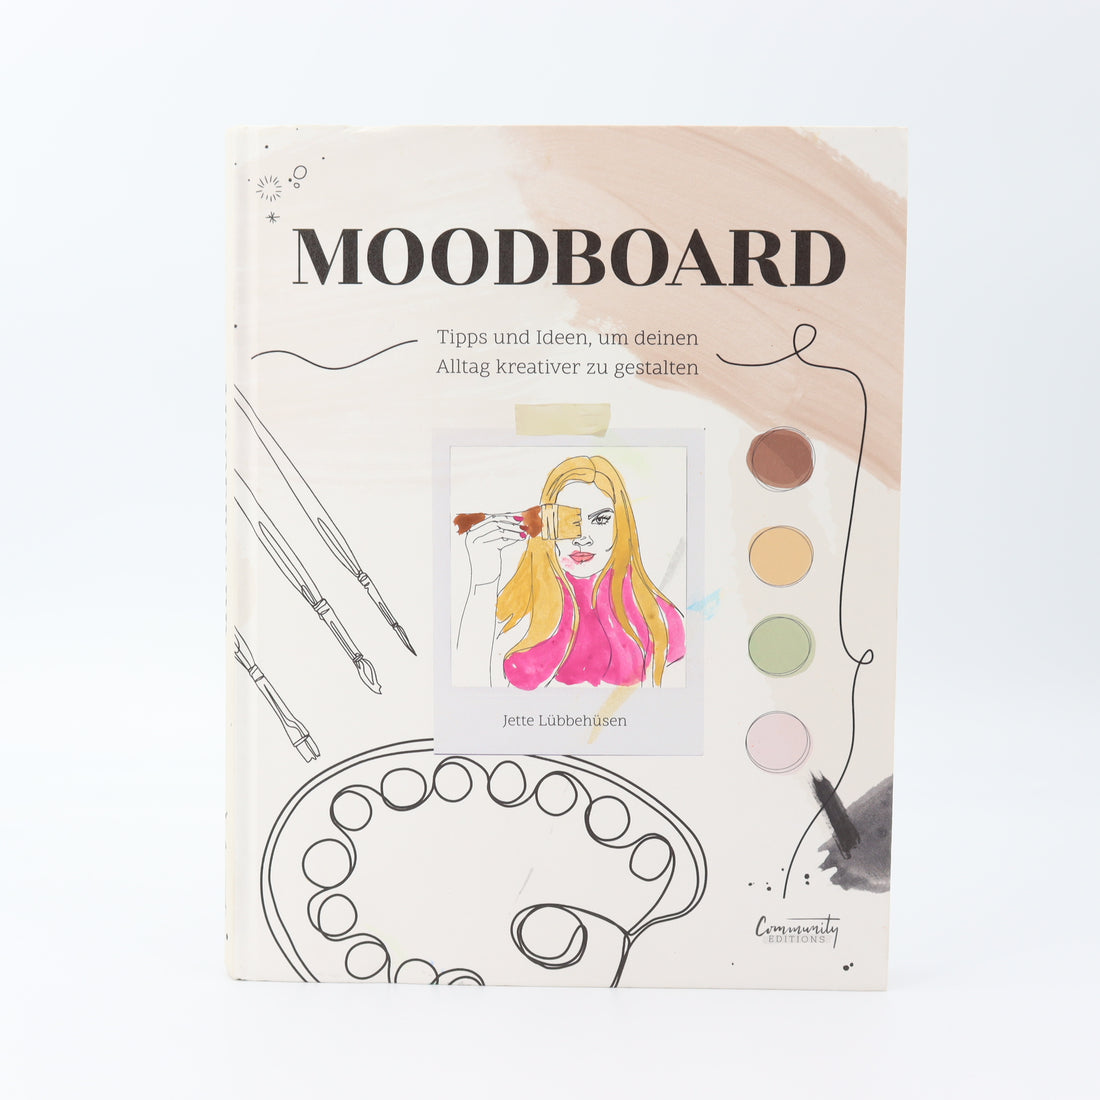 Jugend-Buch - Community Editions -  - Moodboard -  - Sehr guter Zustand